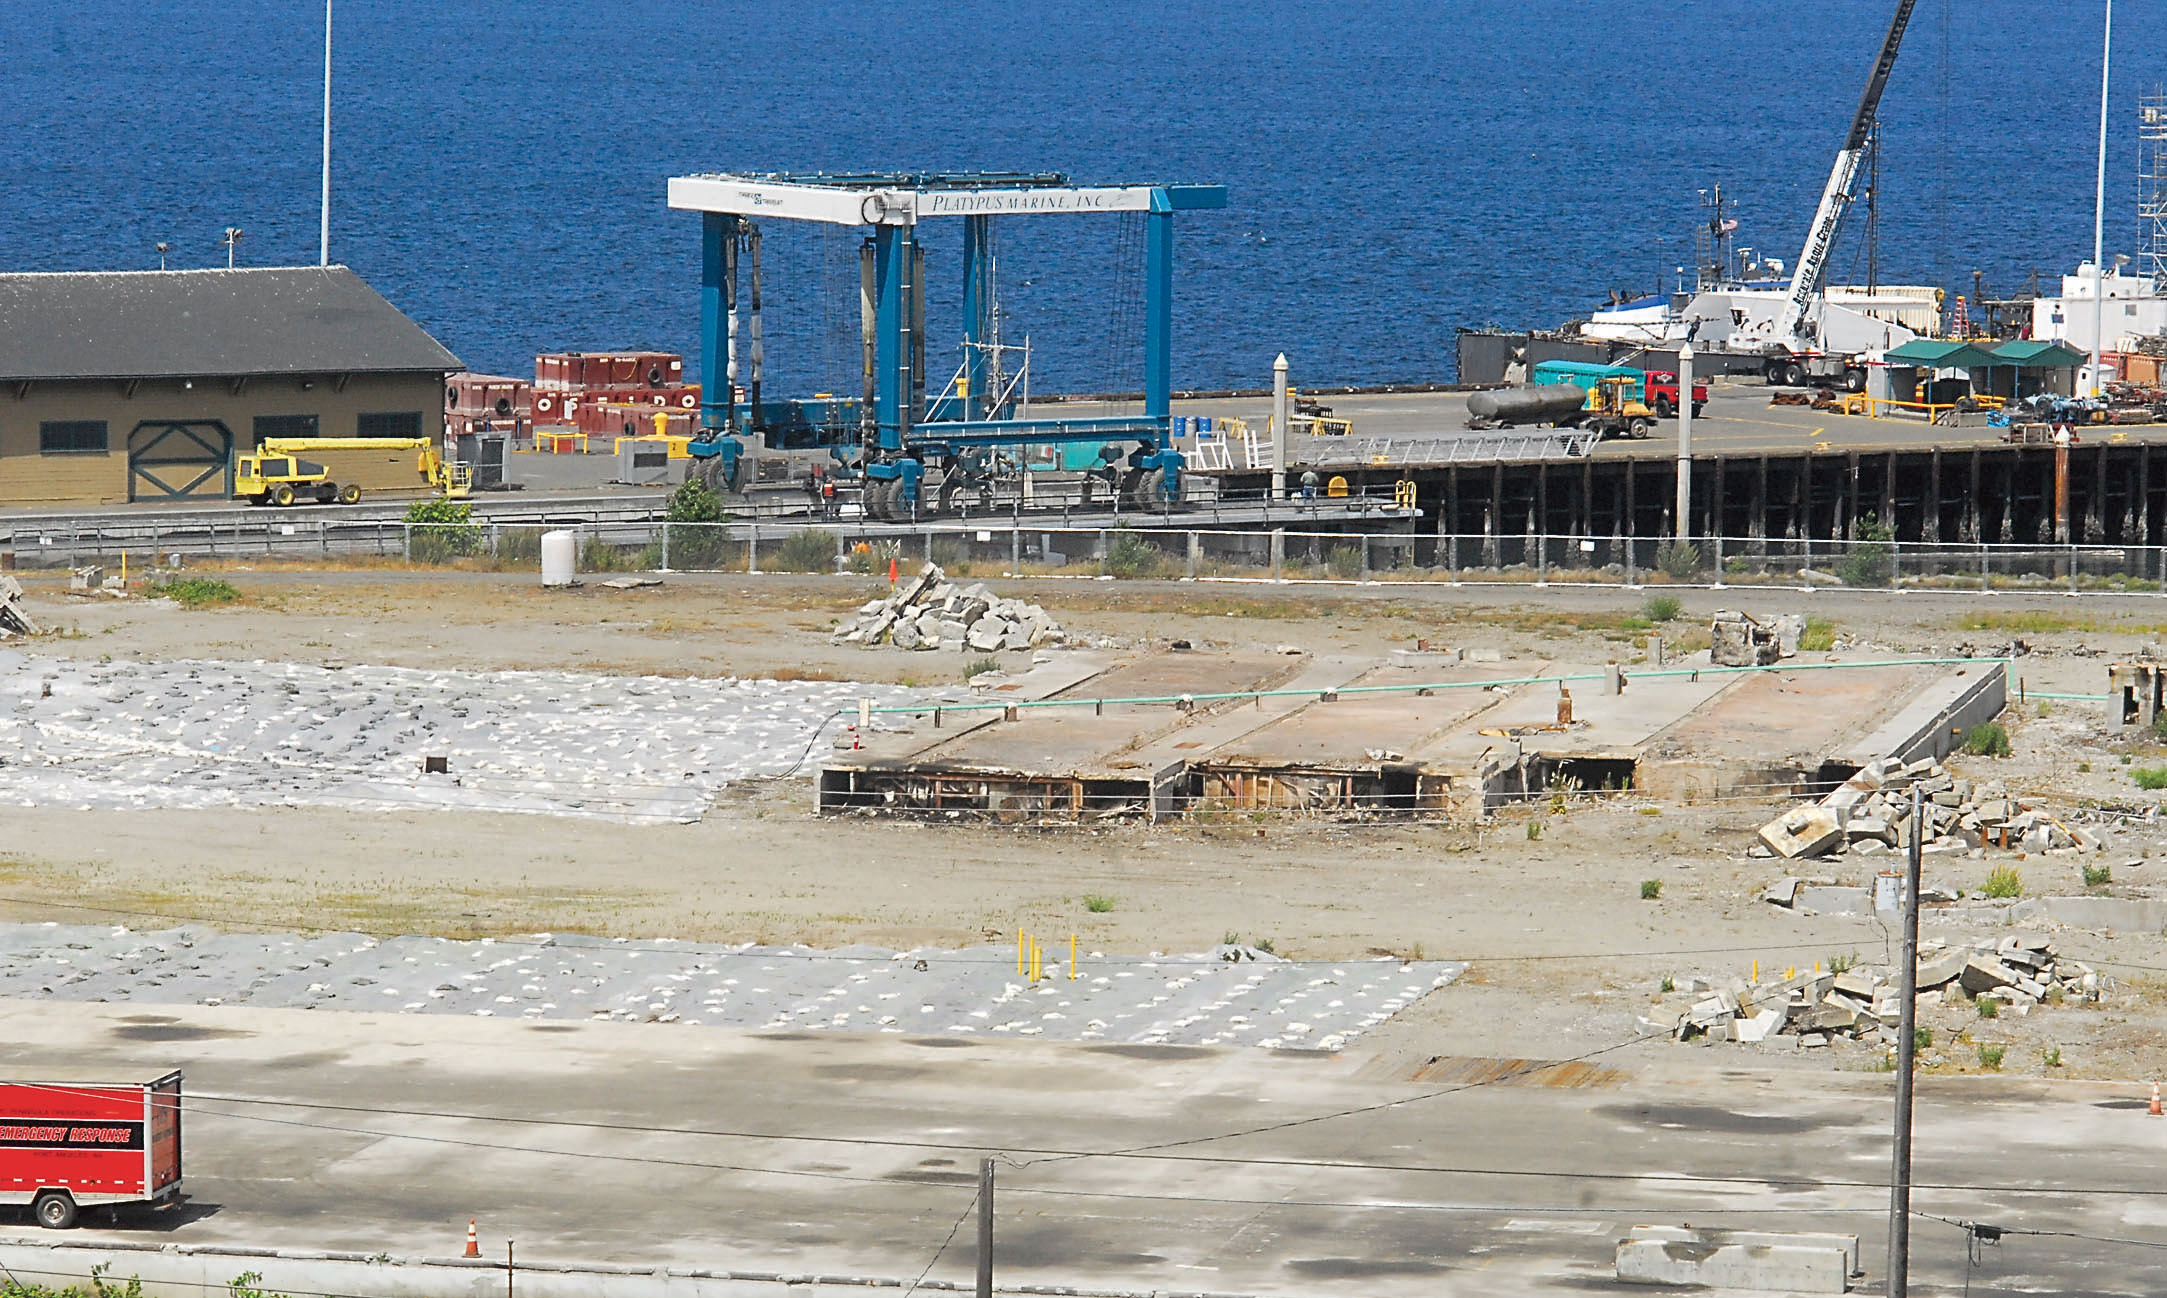 All that’s left of the former Peninsula Plywood mill on the Port Angeles waterfront are concrete foundations